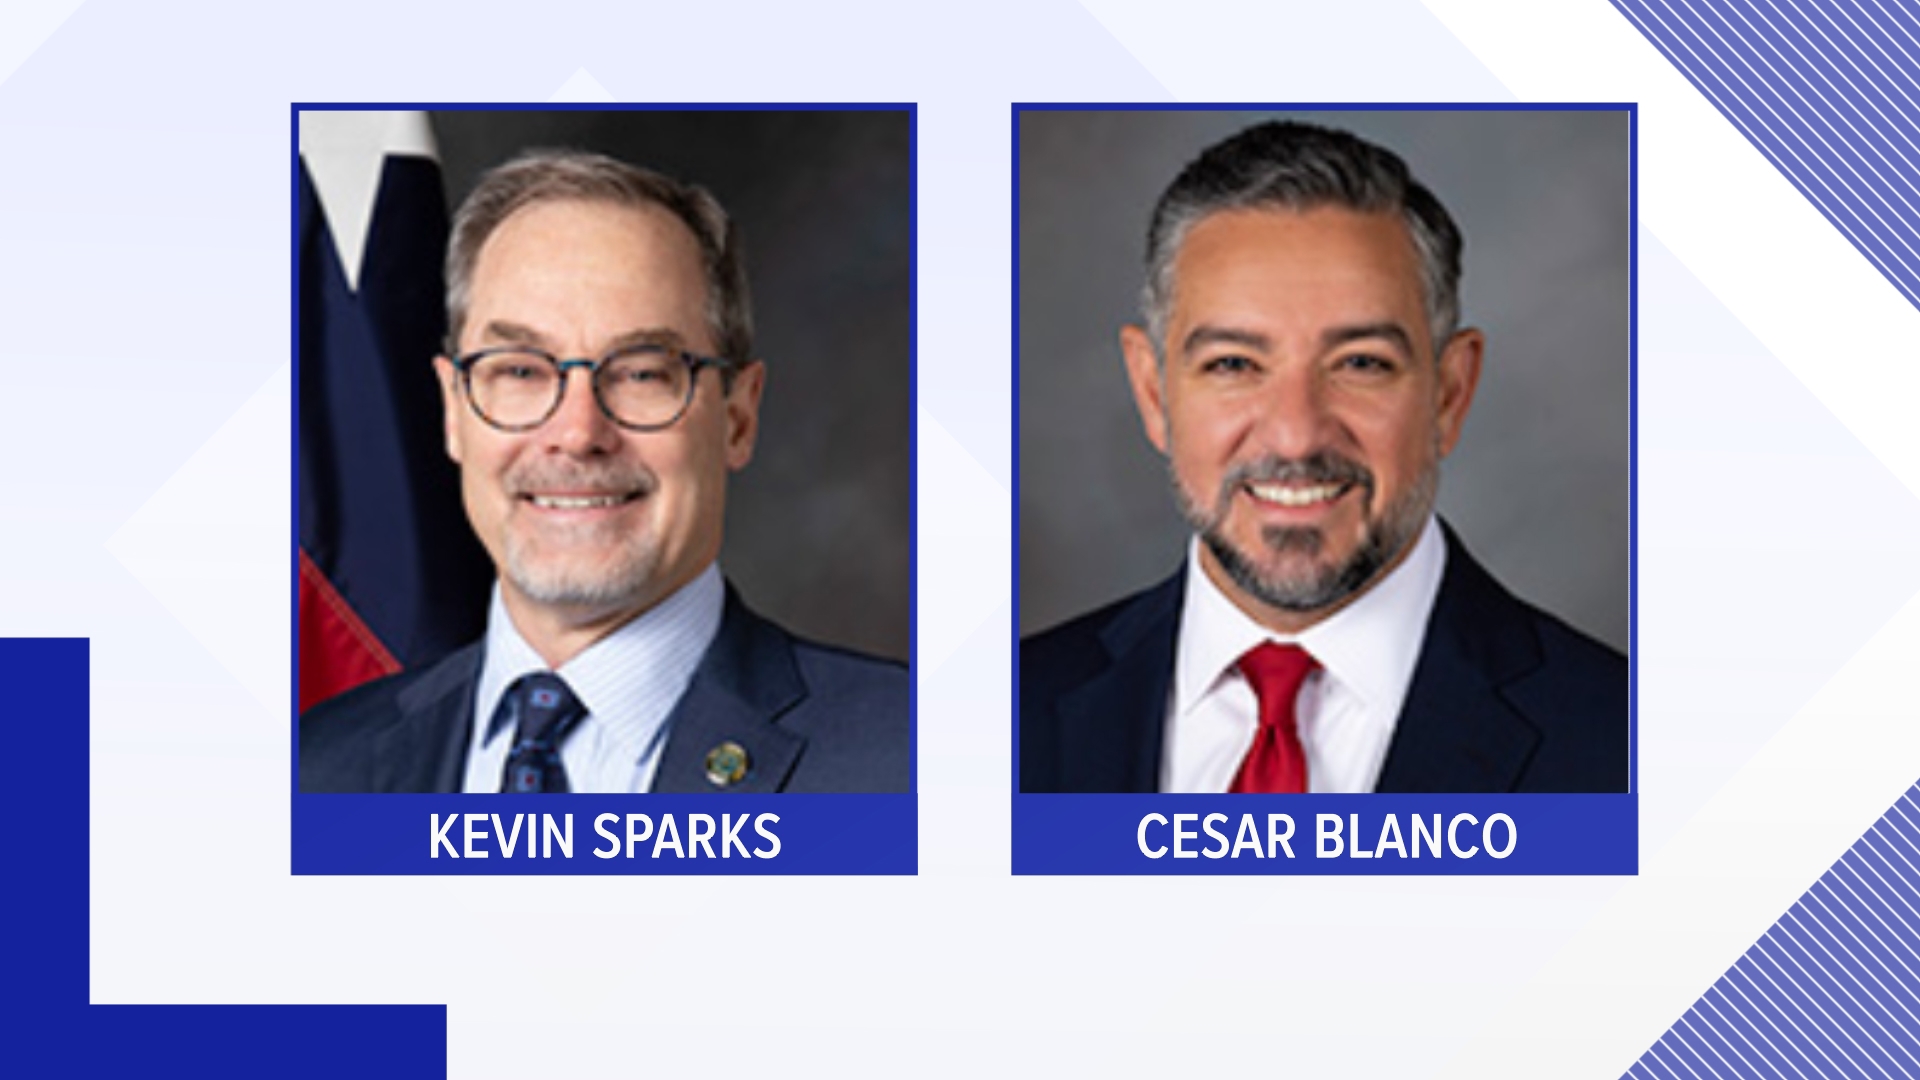 Texas state senators Kevin Sparks and Cesar Blanco have been appointed to the commission. Their voice and input will help strengthen West Texas' presence in Austin.